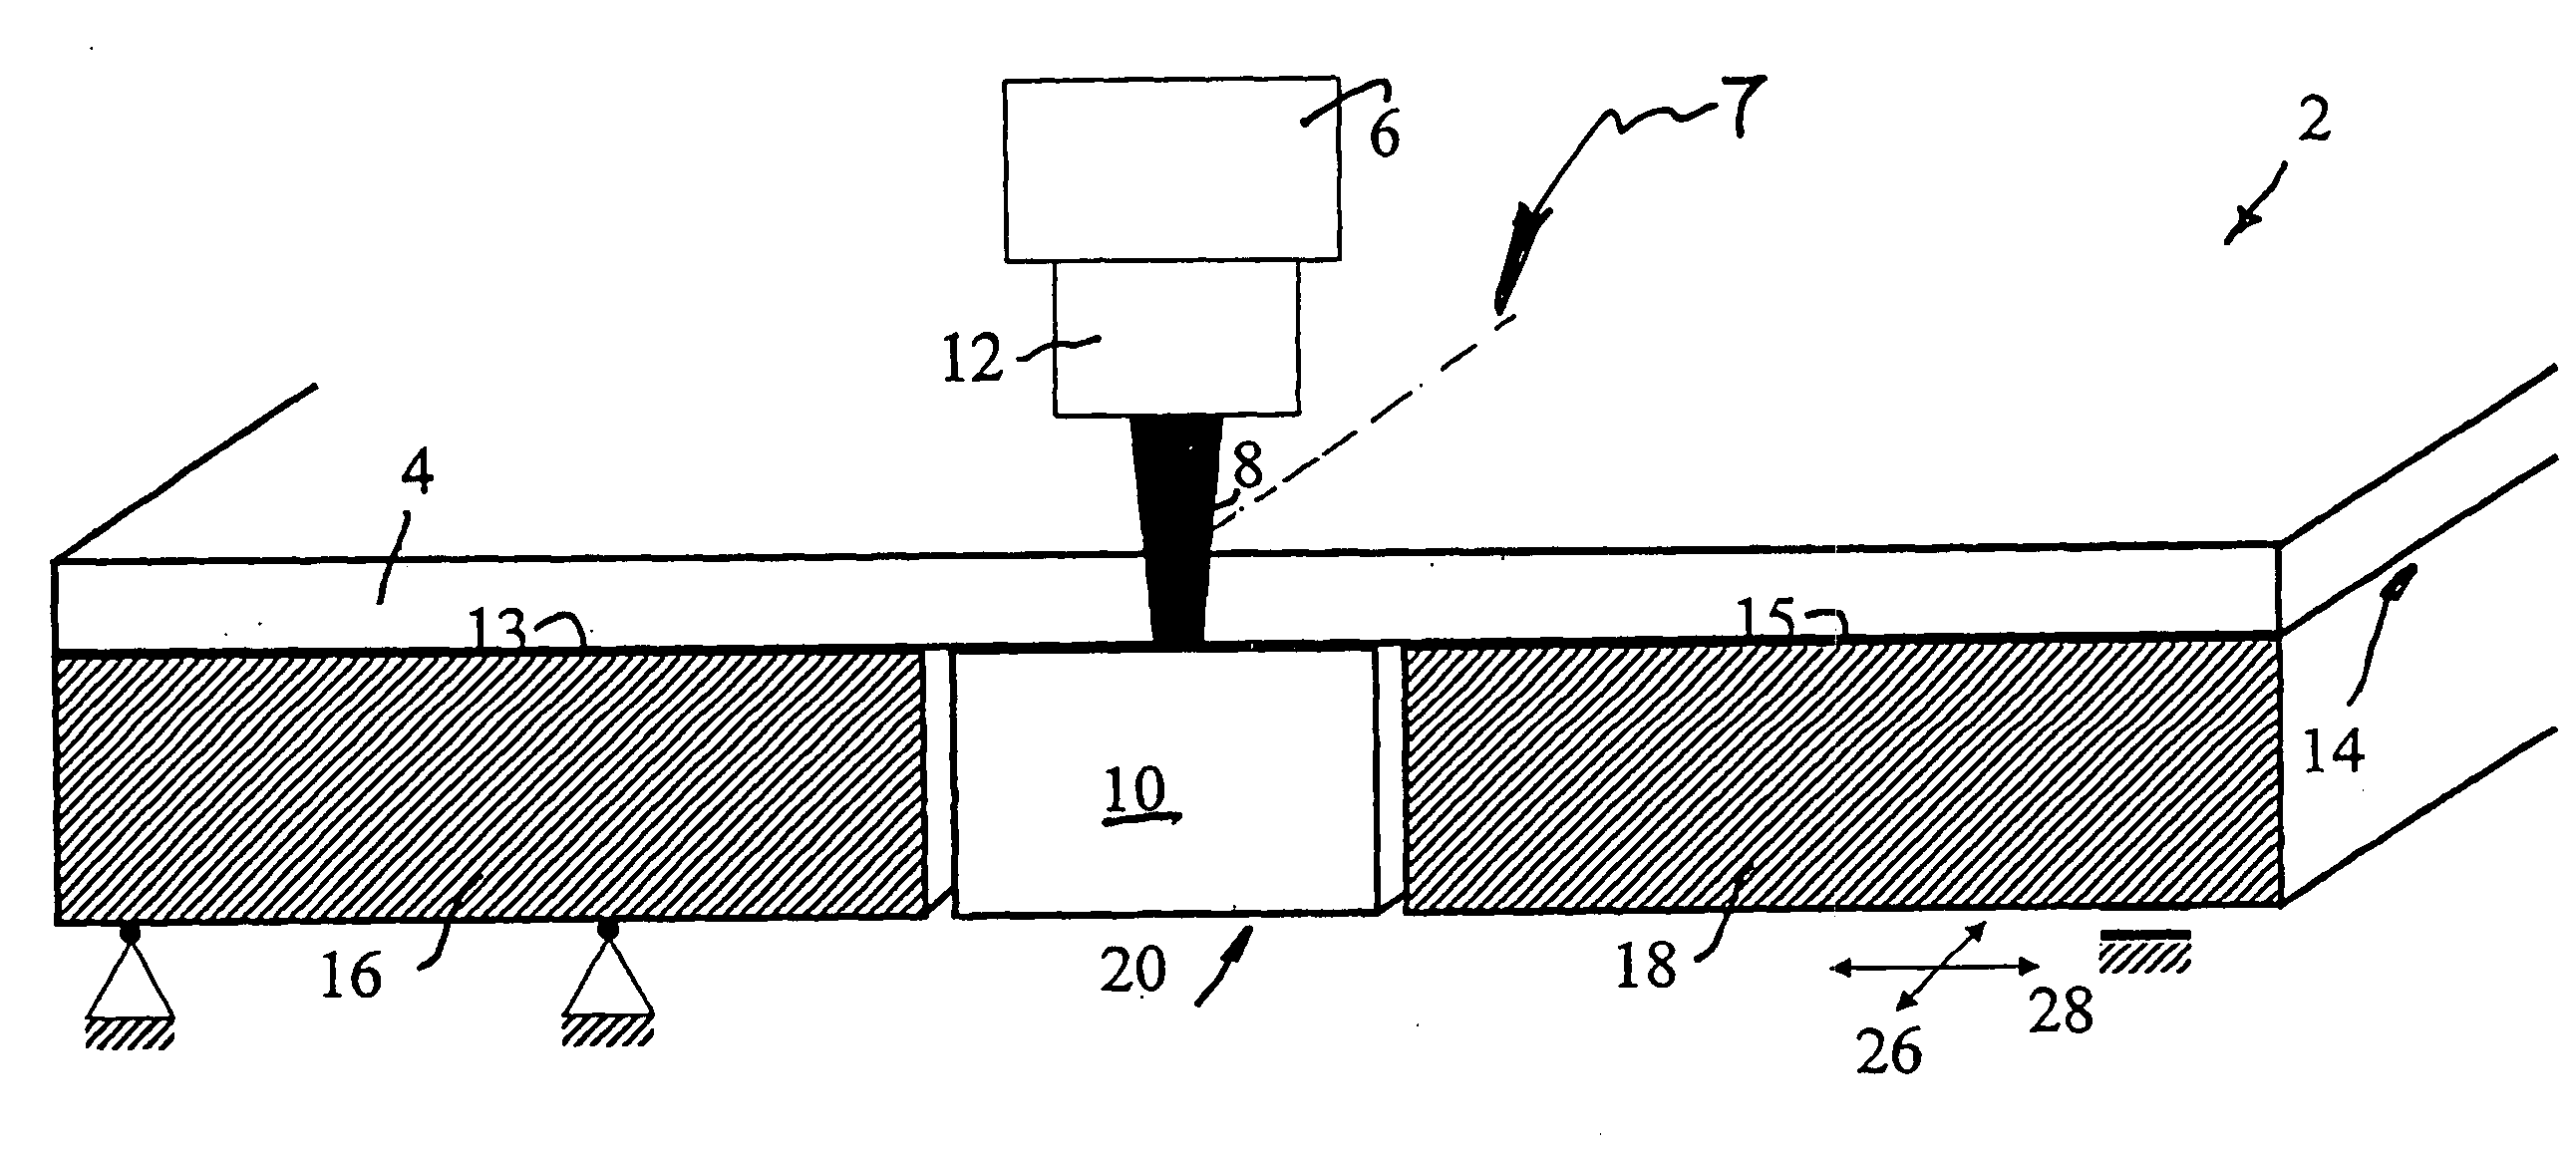 Device for the separative machining of components made from brittle material